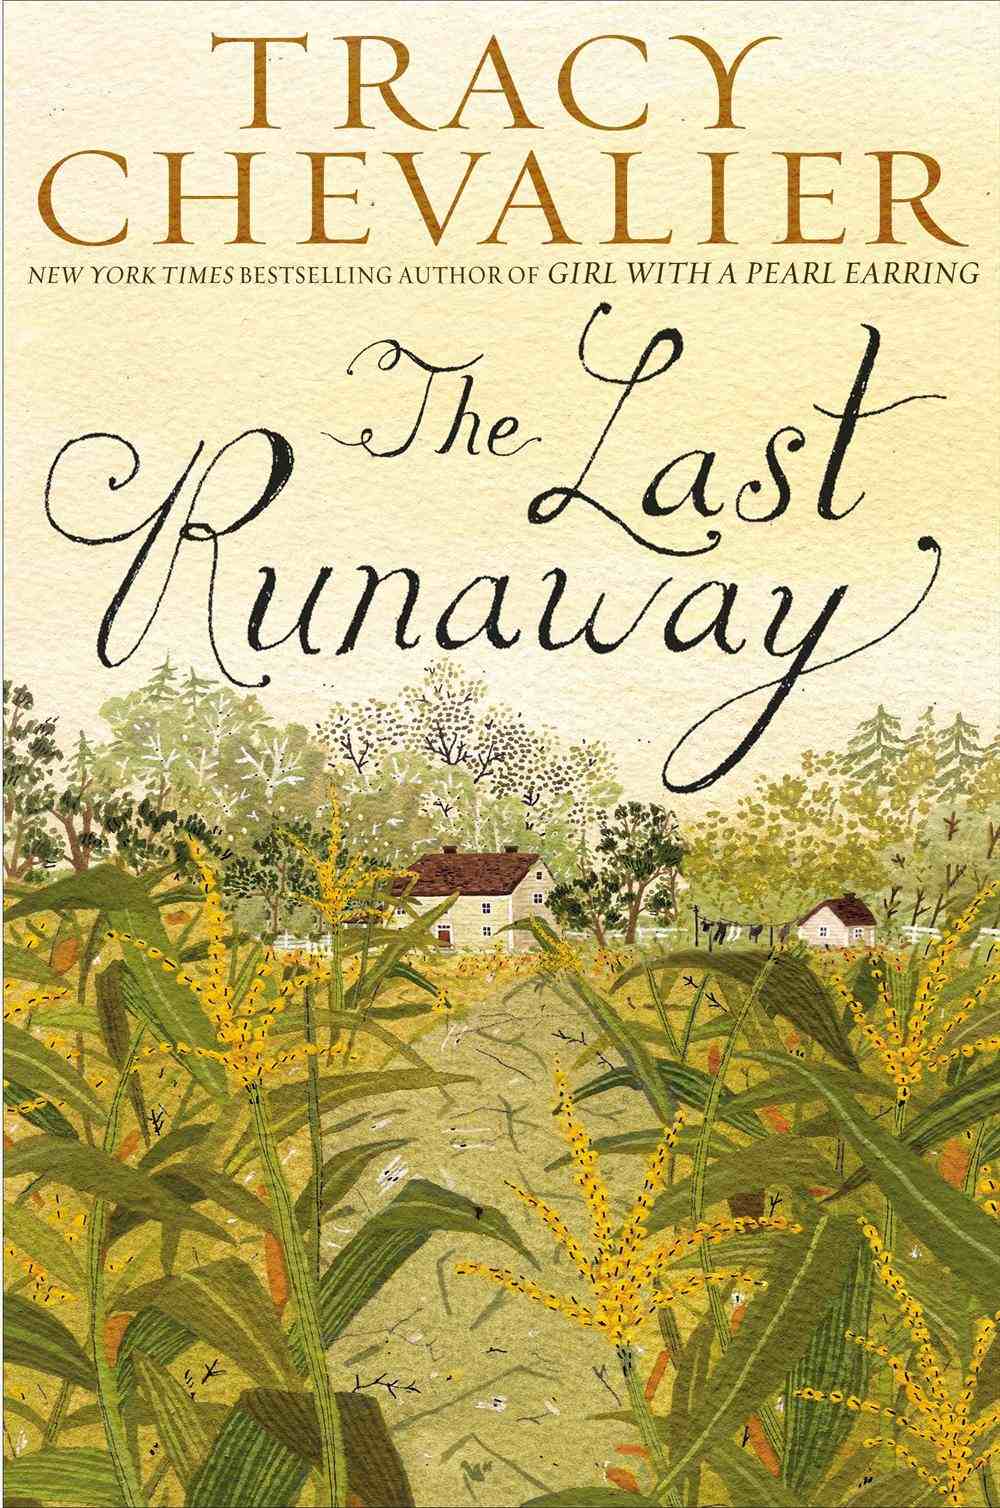 Image result for the last runaway tracy chevalier